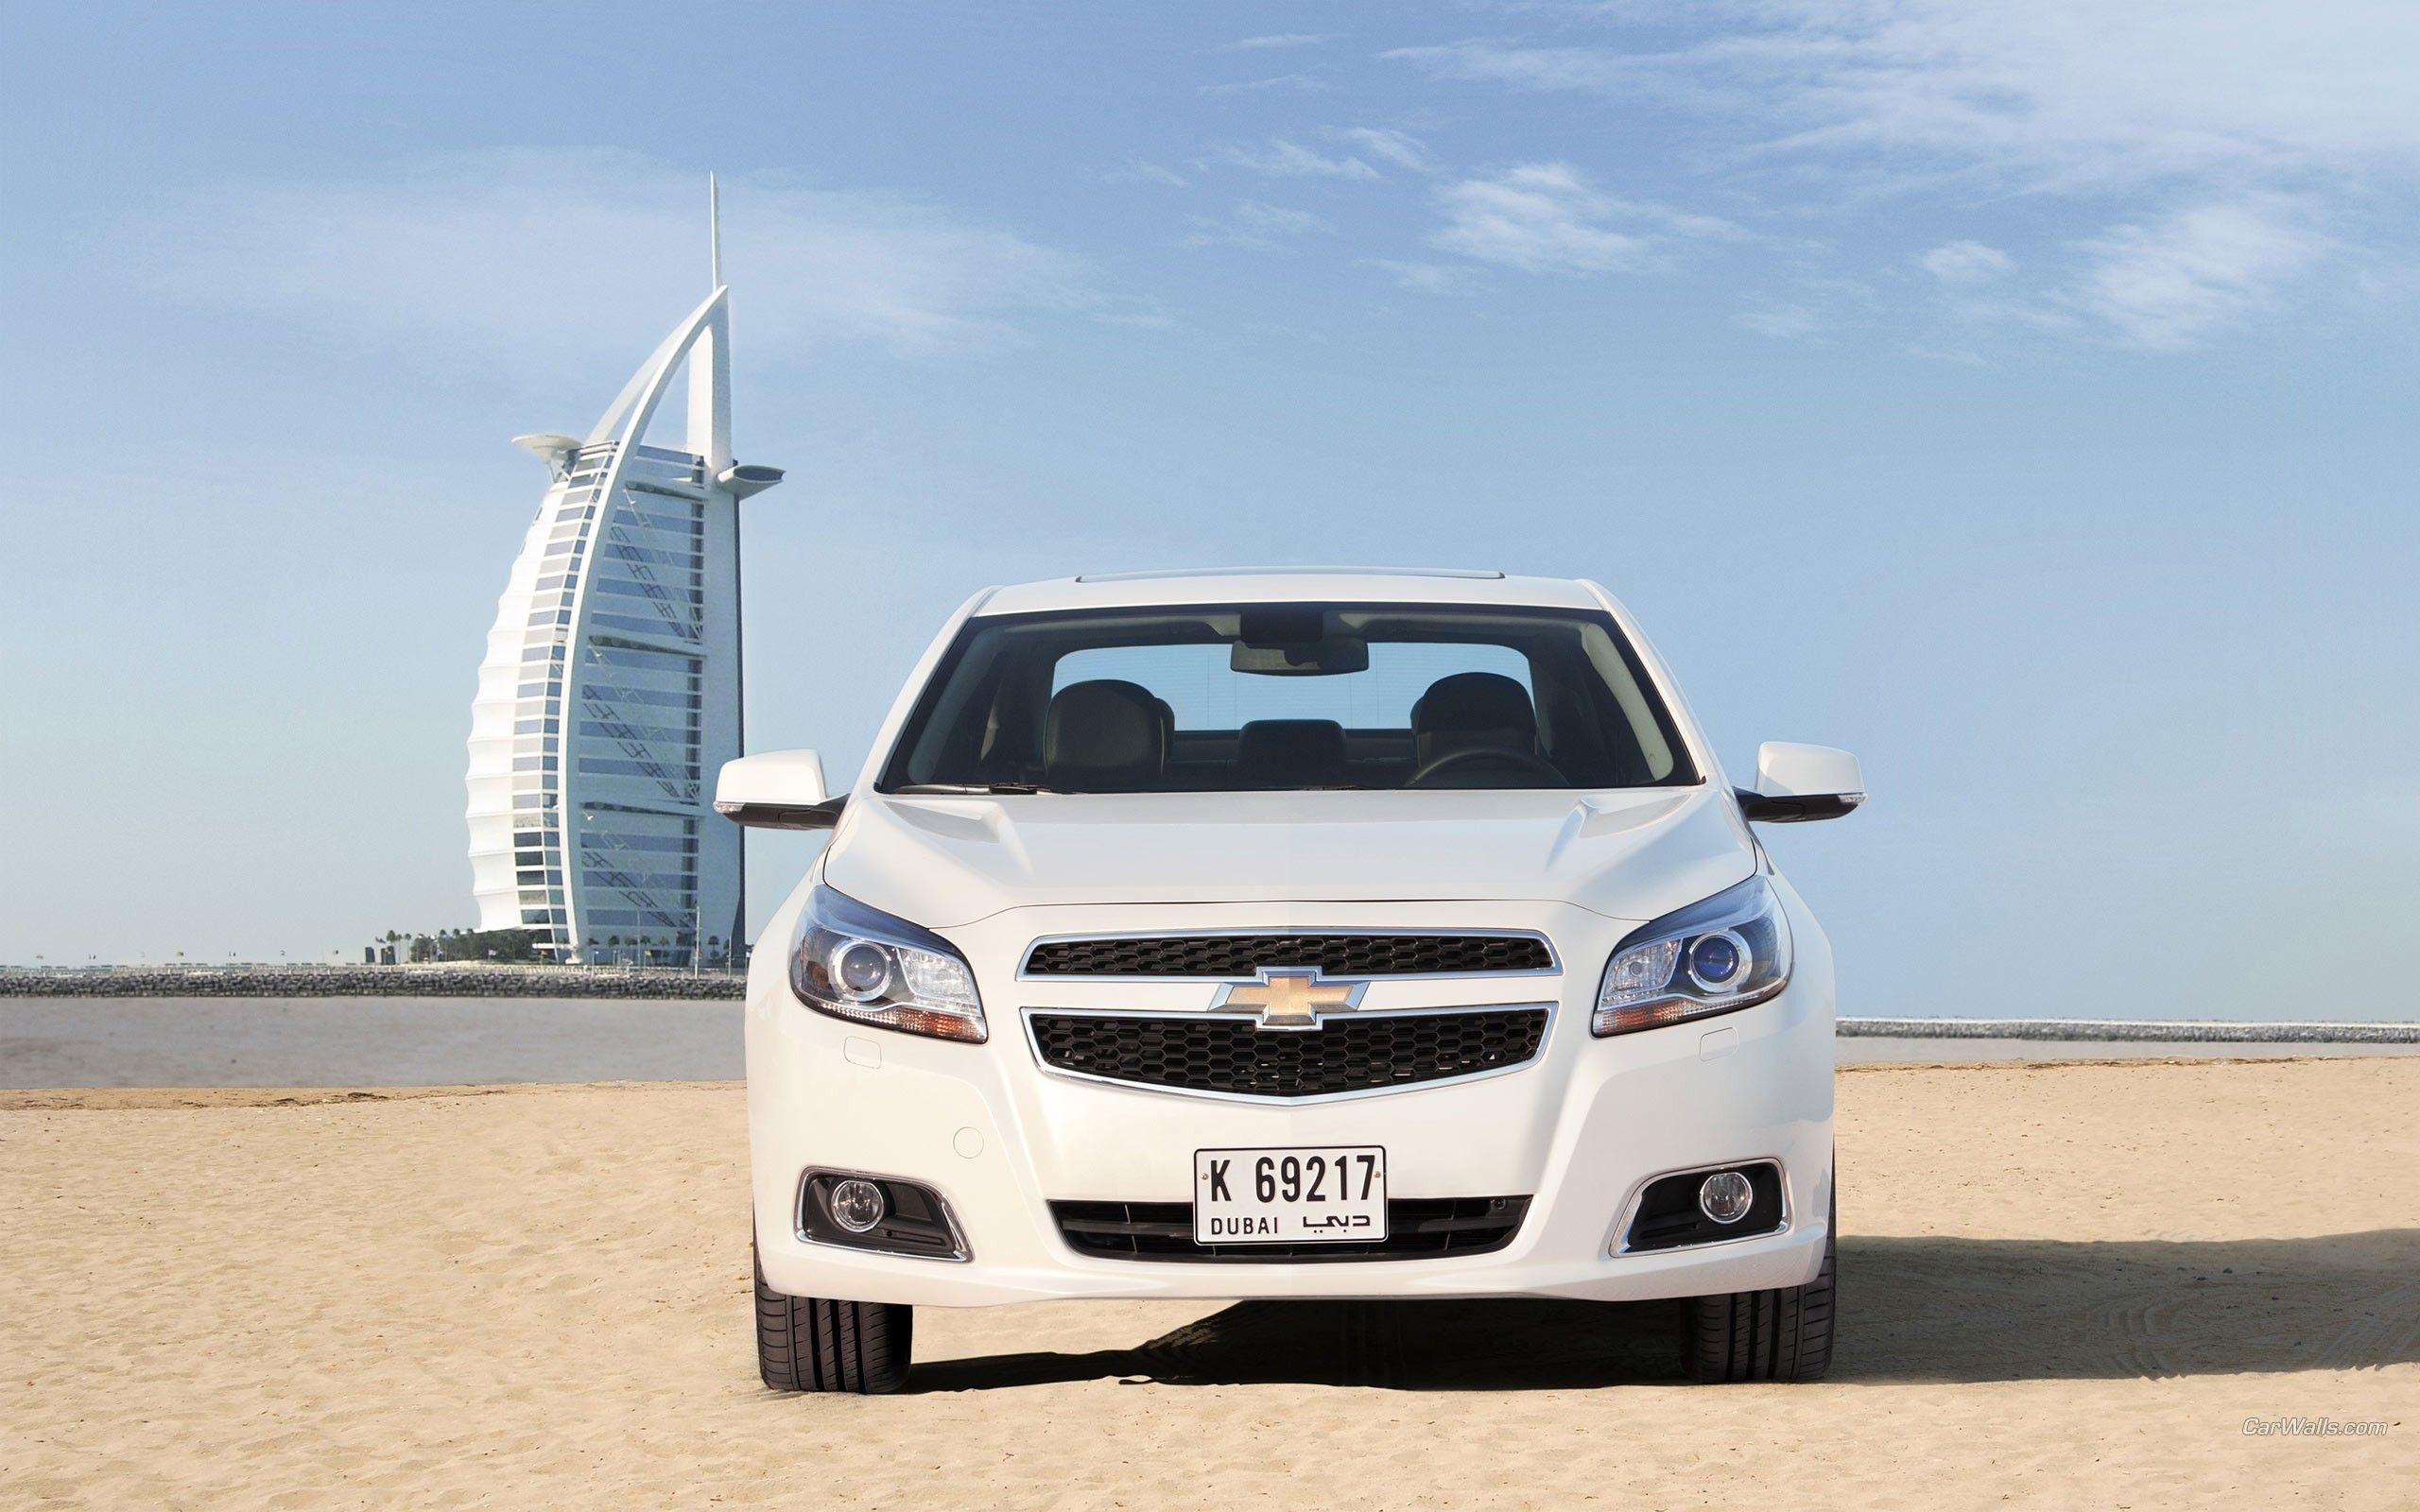 Chevrolet car in Dubai wallpapers and images - wallpapers ...